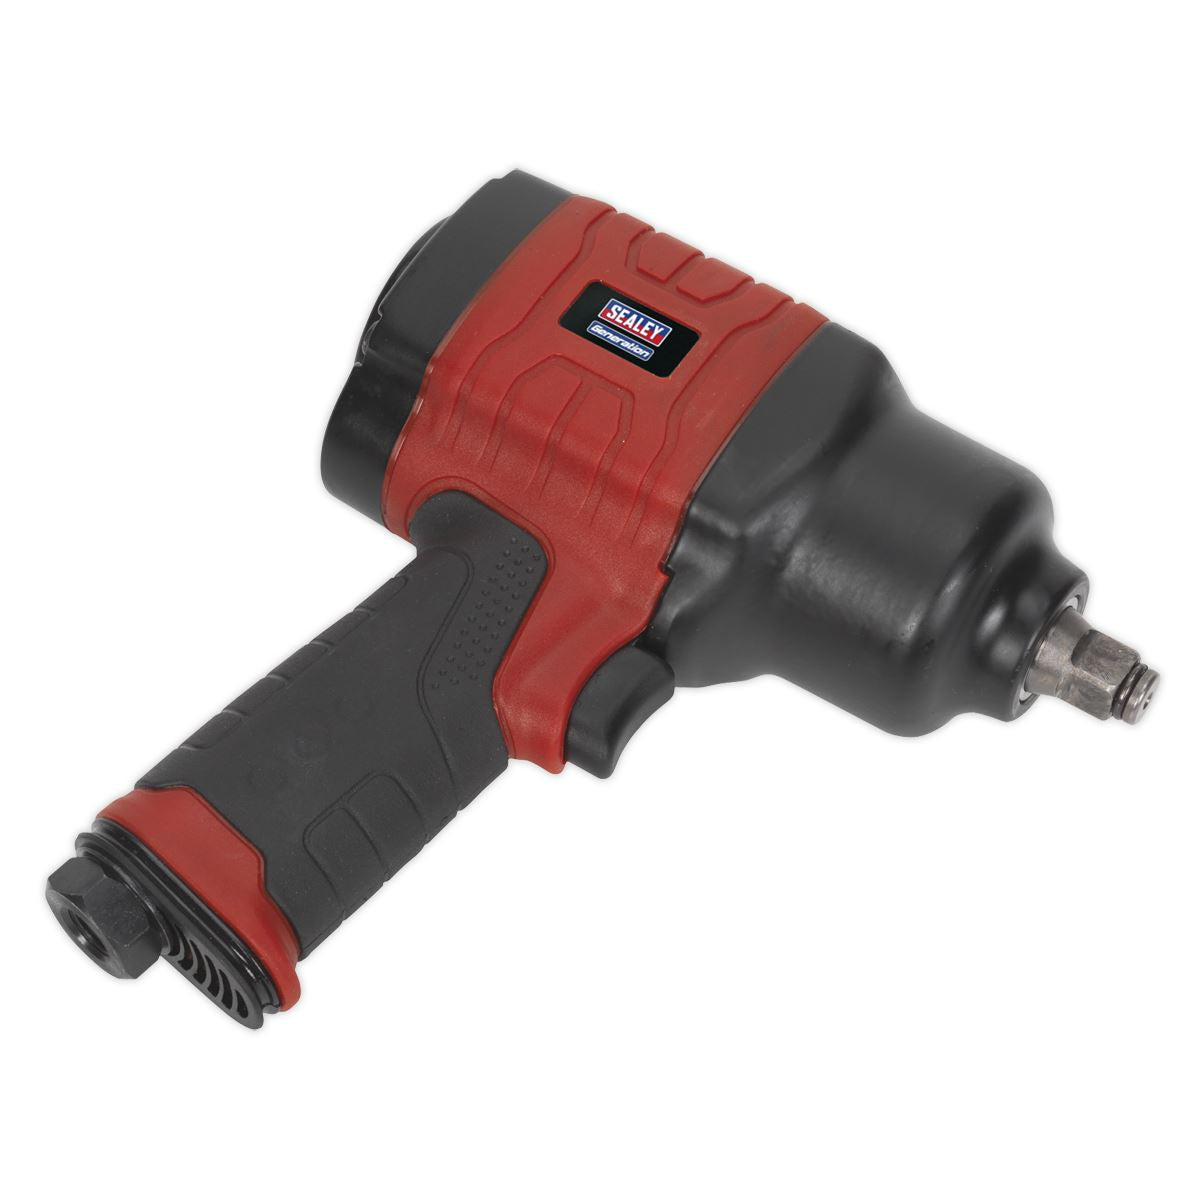 Generation Composite Air Impact Wrench 1/2"Sq Drive - Twin Hammer